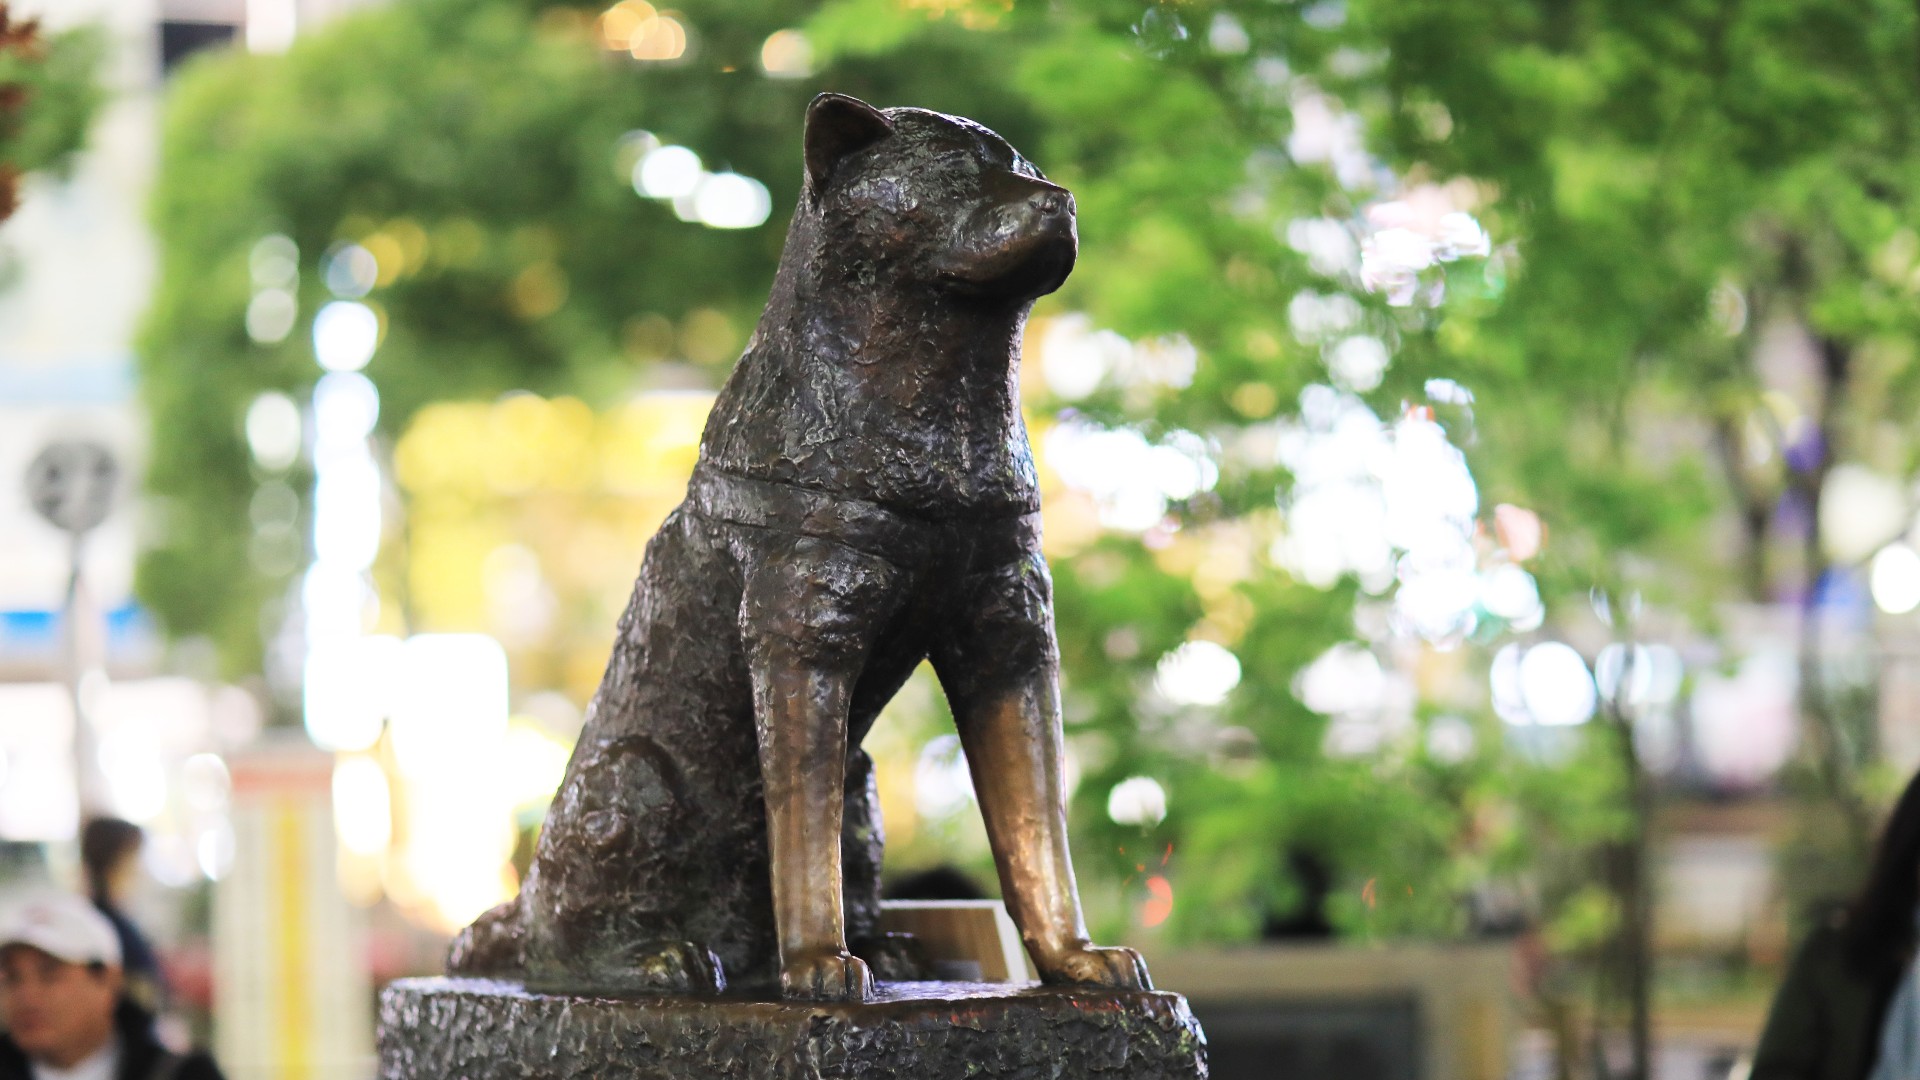 Statue of the loyal dog Hachiko in Tokyo, Japan.